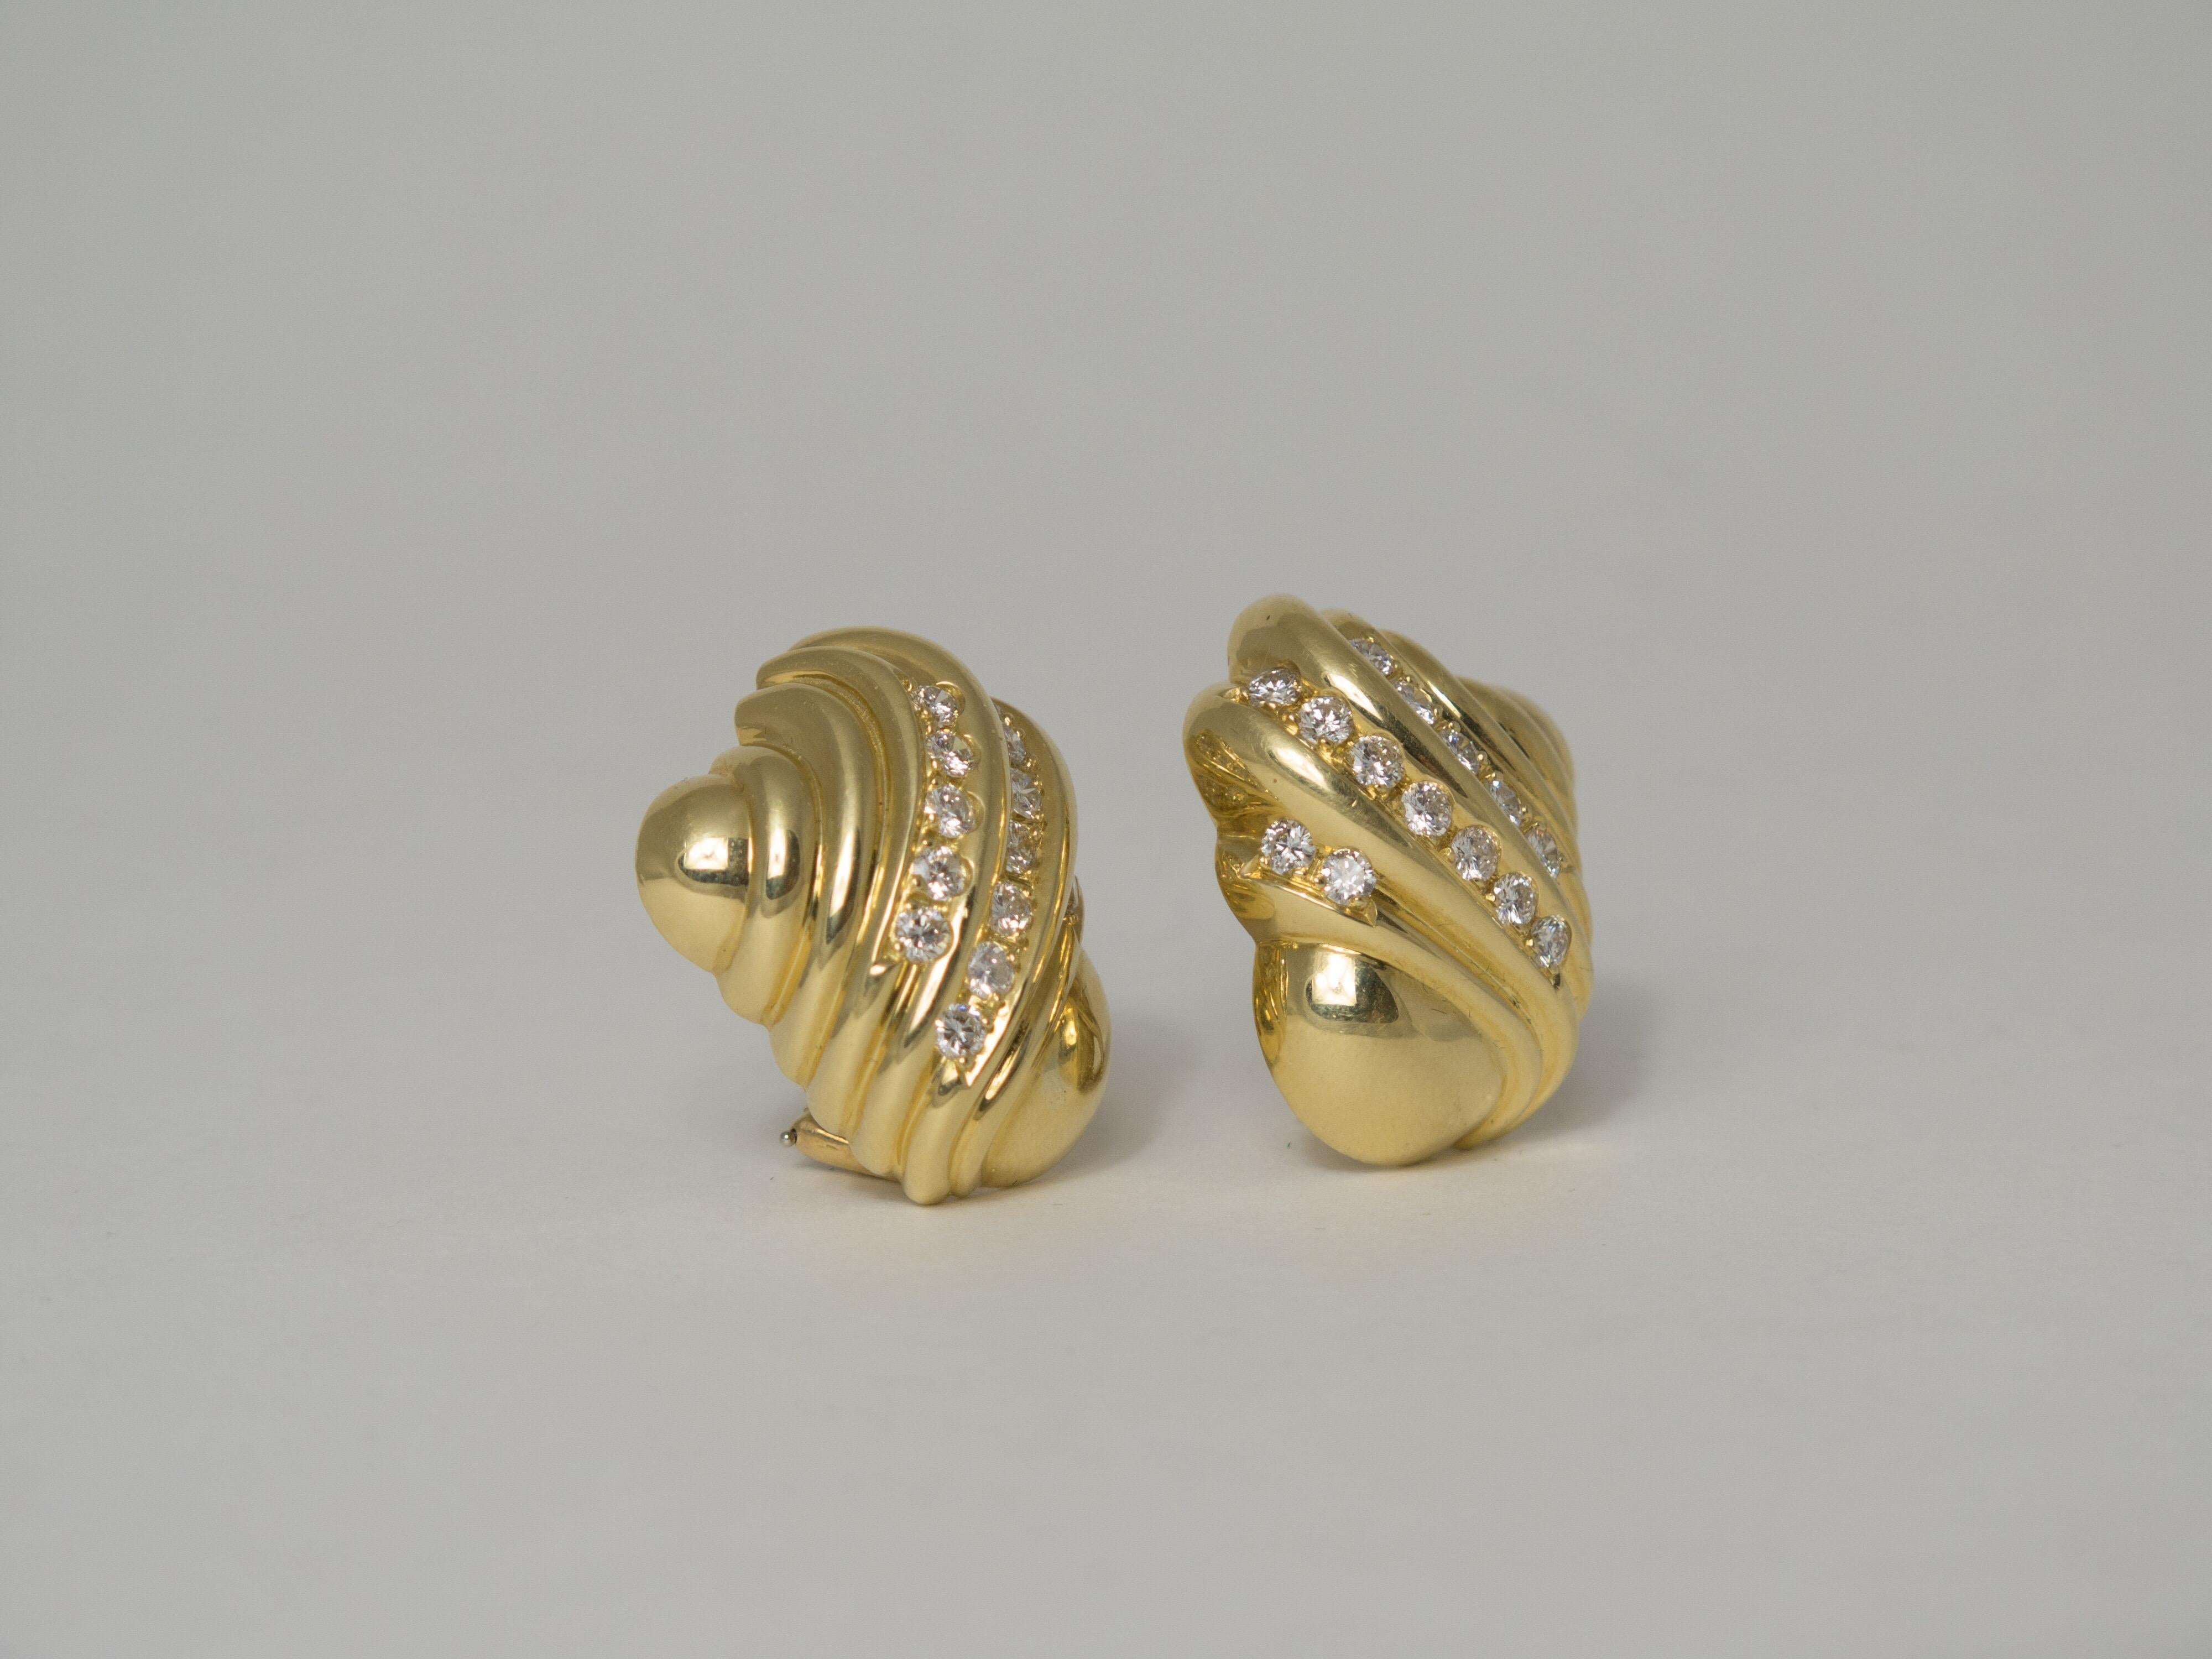 A classic pair of turbo shell shaped clip-on earrings in heavy 18k yellow gold accented with a curved band of diamonds that follow the natural lines of the shell form. 
The earrings are heavy, weighing a total of 31.46 grams. However, they are easy